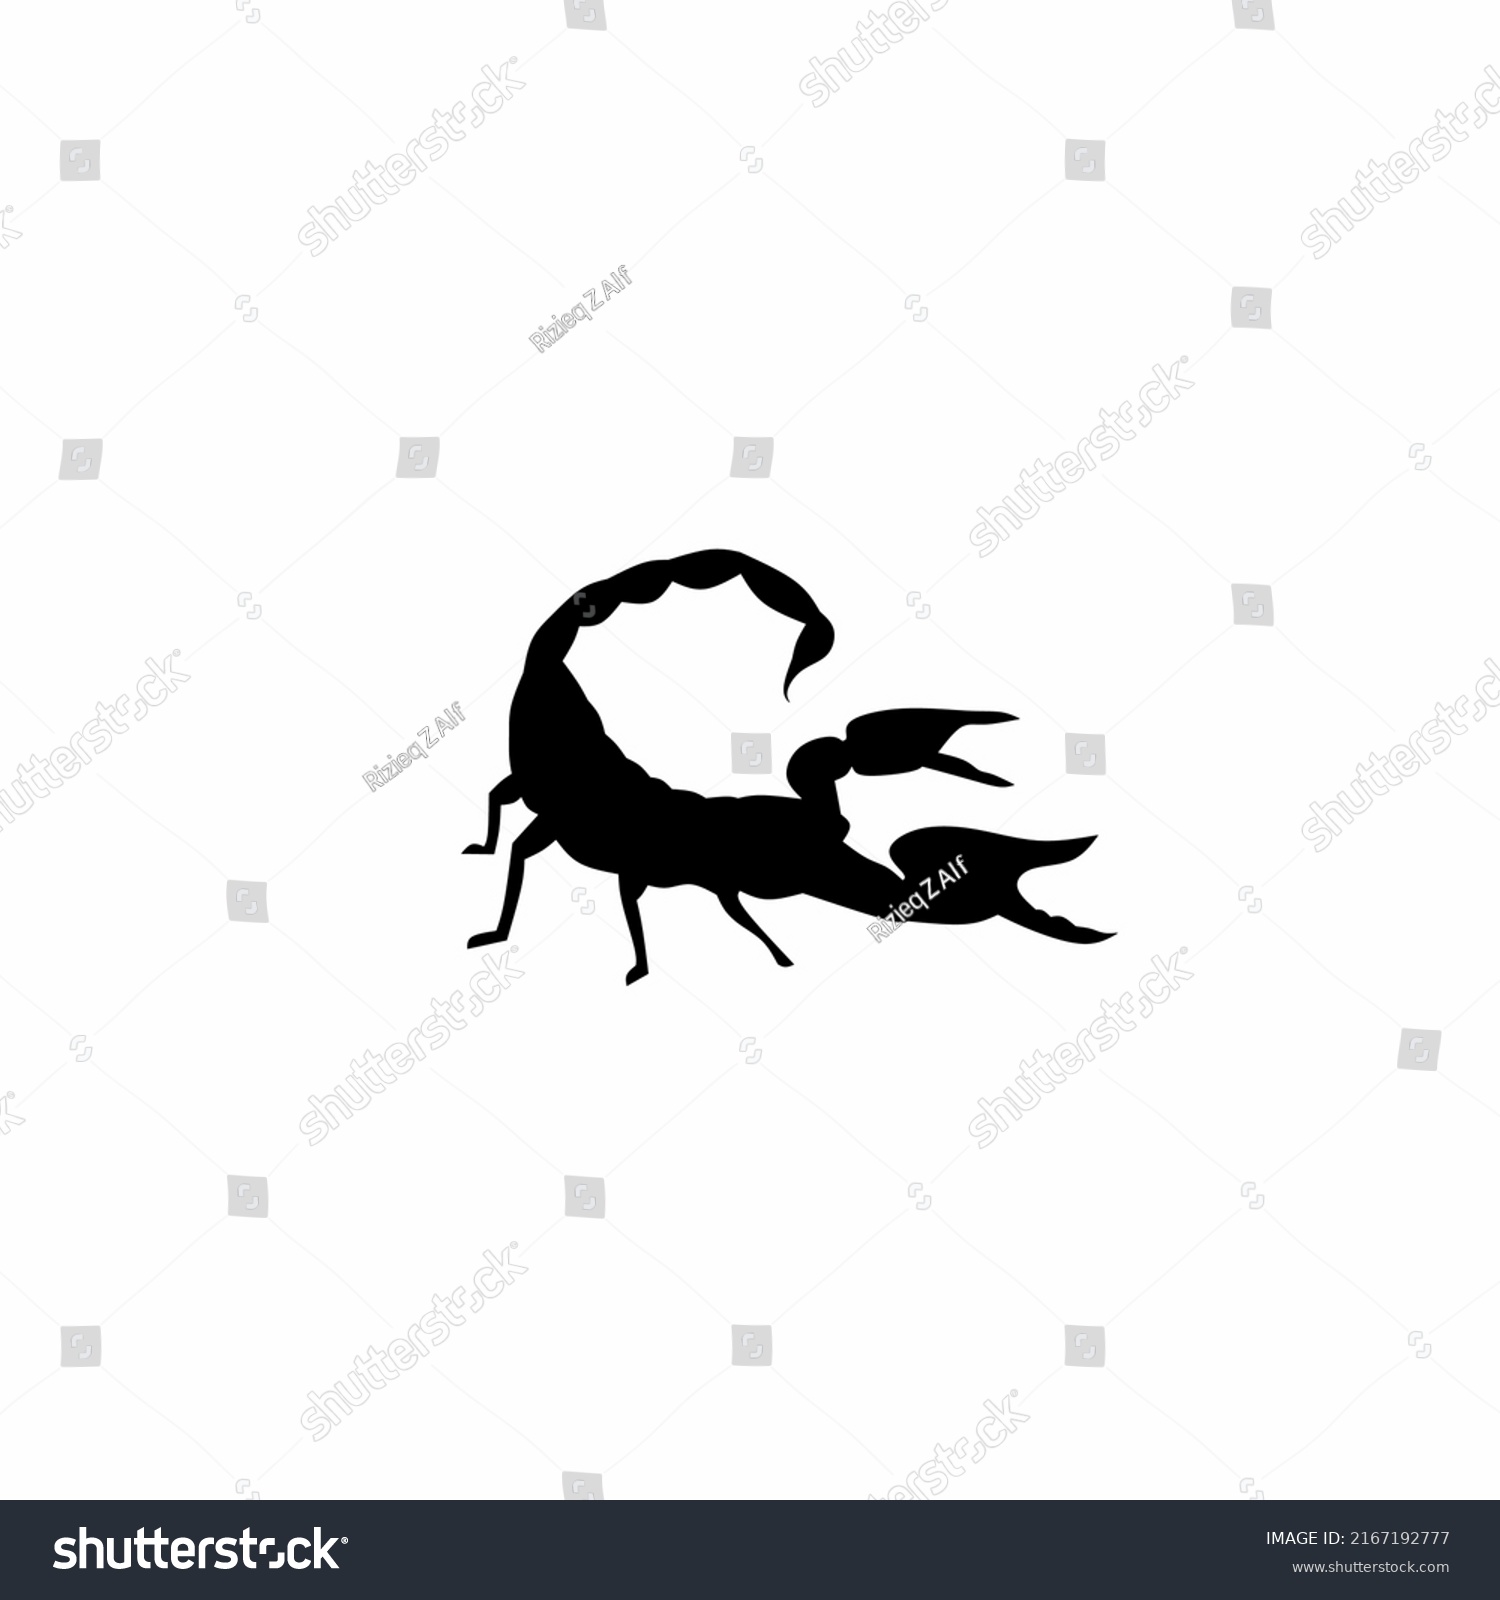 SVG of Scorpion silhouette isolated on white background svg